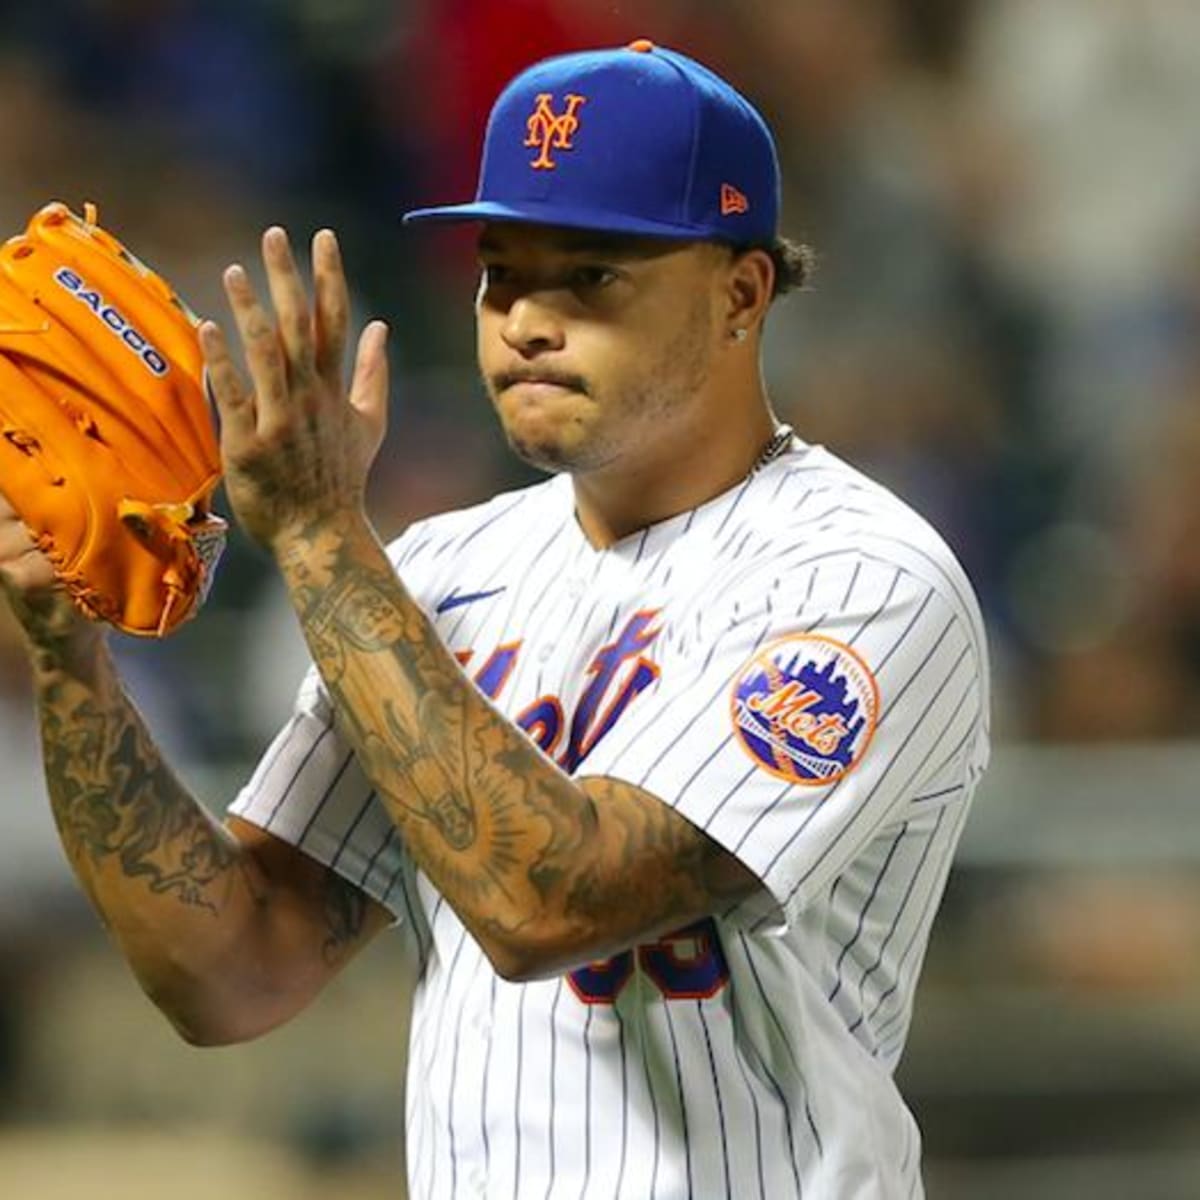 NY Mets: Where will Taijuan Walker sign this winter and for how much?